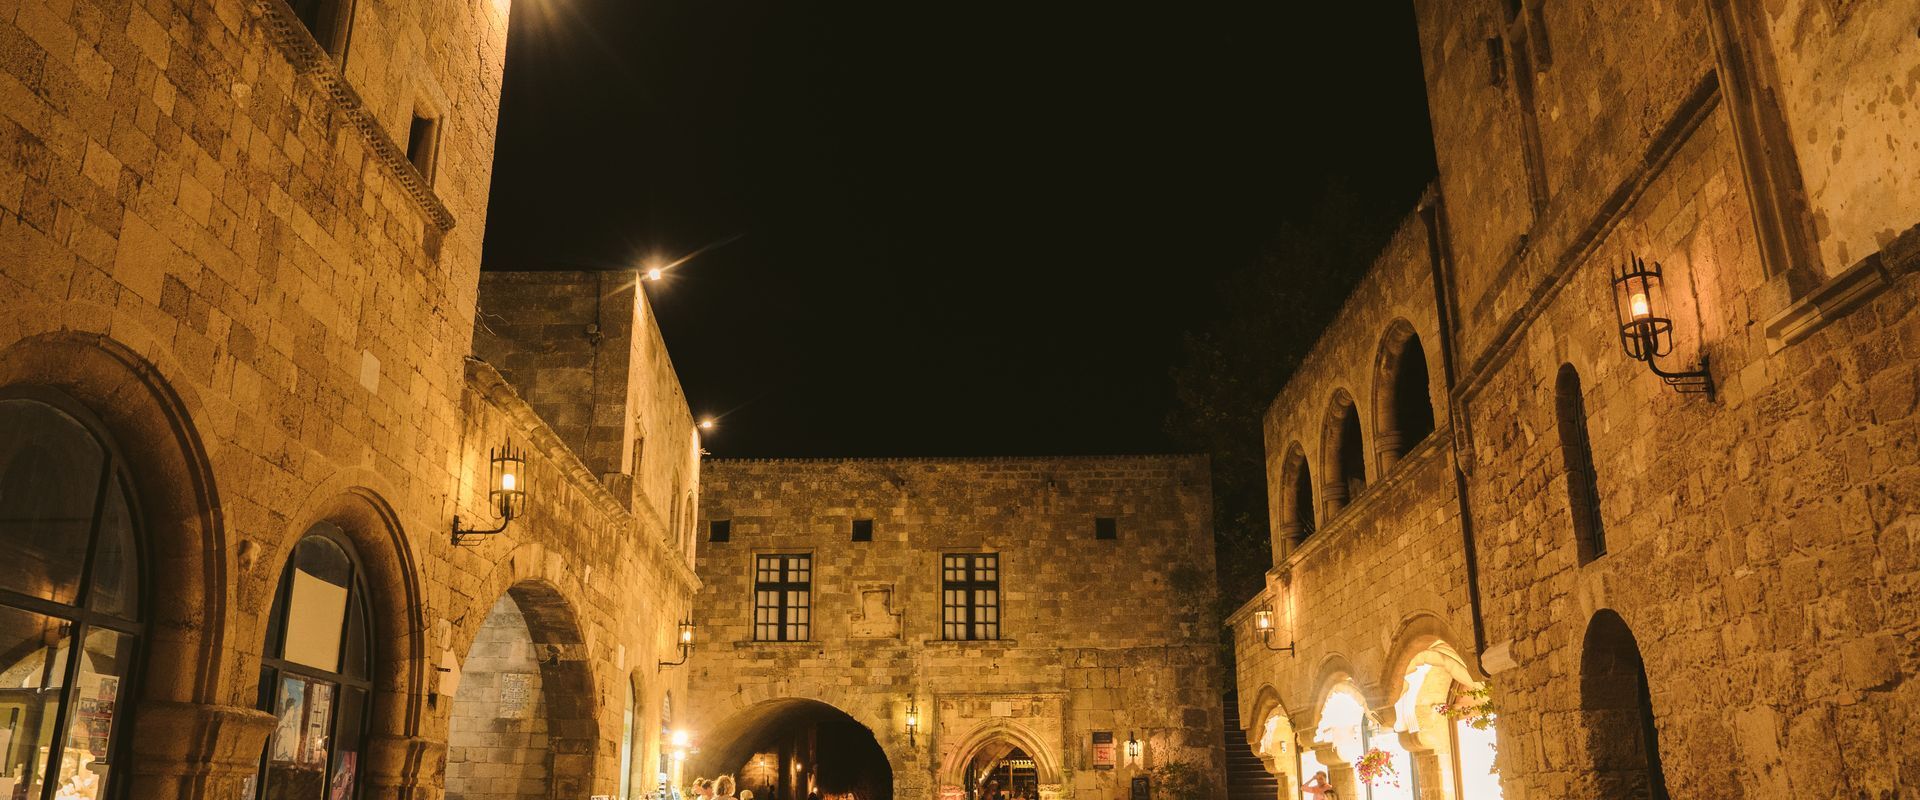 The medieval town of Rhodes at night 